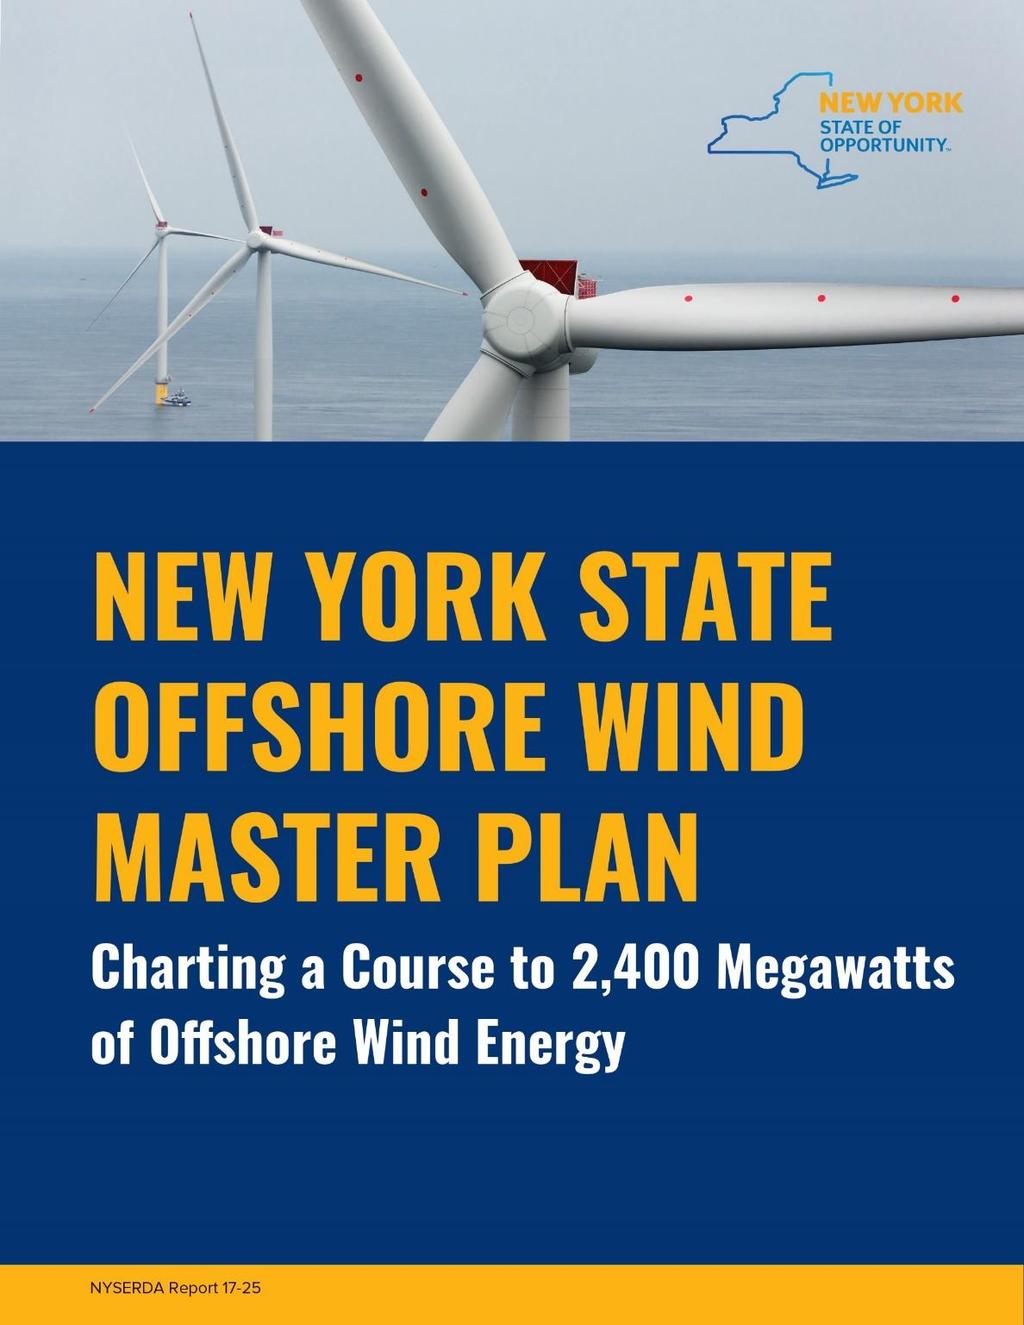 19 Offshore Wind Master Plan A comprehensive state roadmap for advancing development of offshore wind in a cost-effective and responsible manner Key Elements Identifies the most favorable areas for